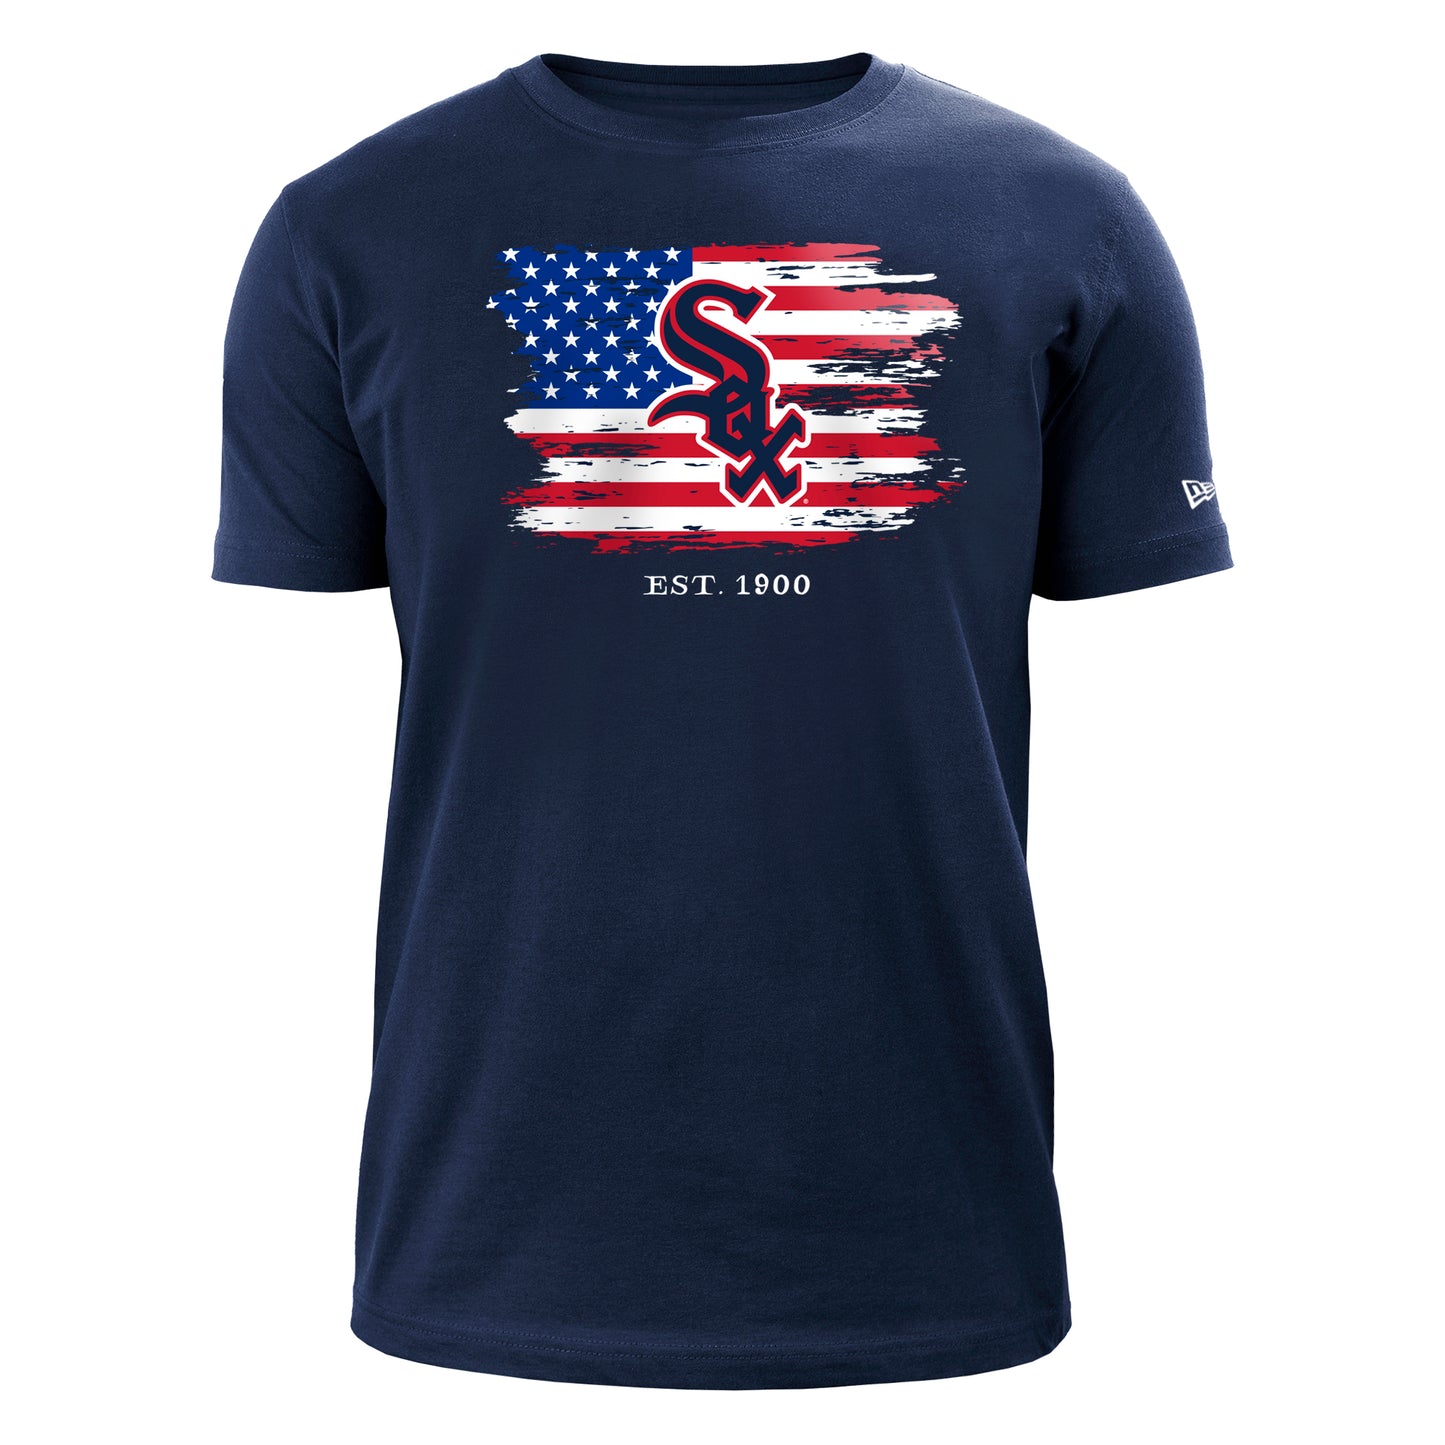 Men's Chicago White Sox 4th of July Stars and Stripes Navy New Era Tee